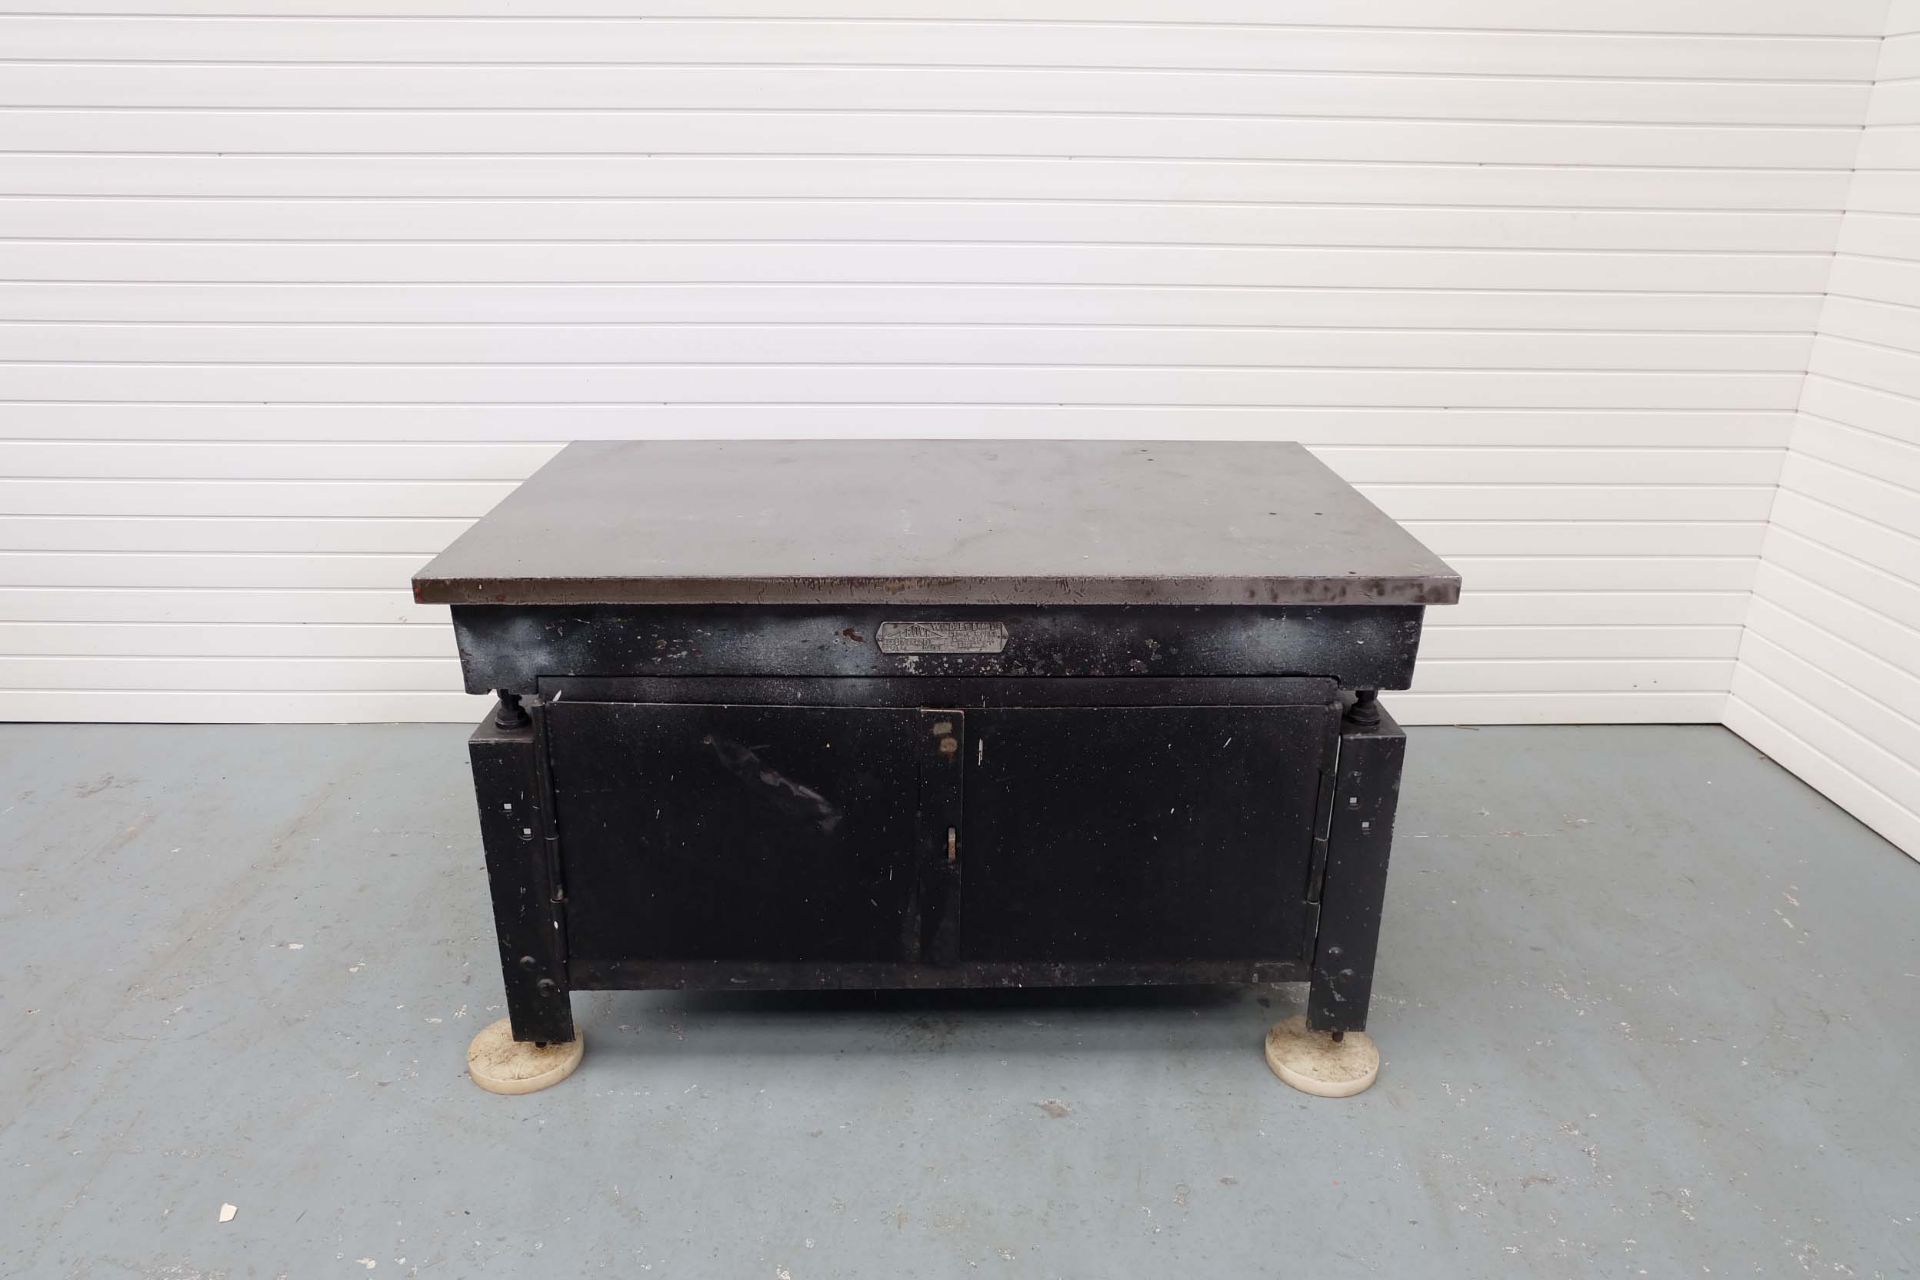 Crown Windley Cast Iron Surface Table On Levelling Stand With Steel Cabinet. Size 5' x 3'. Height: 3